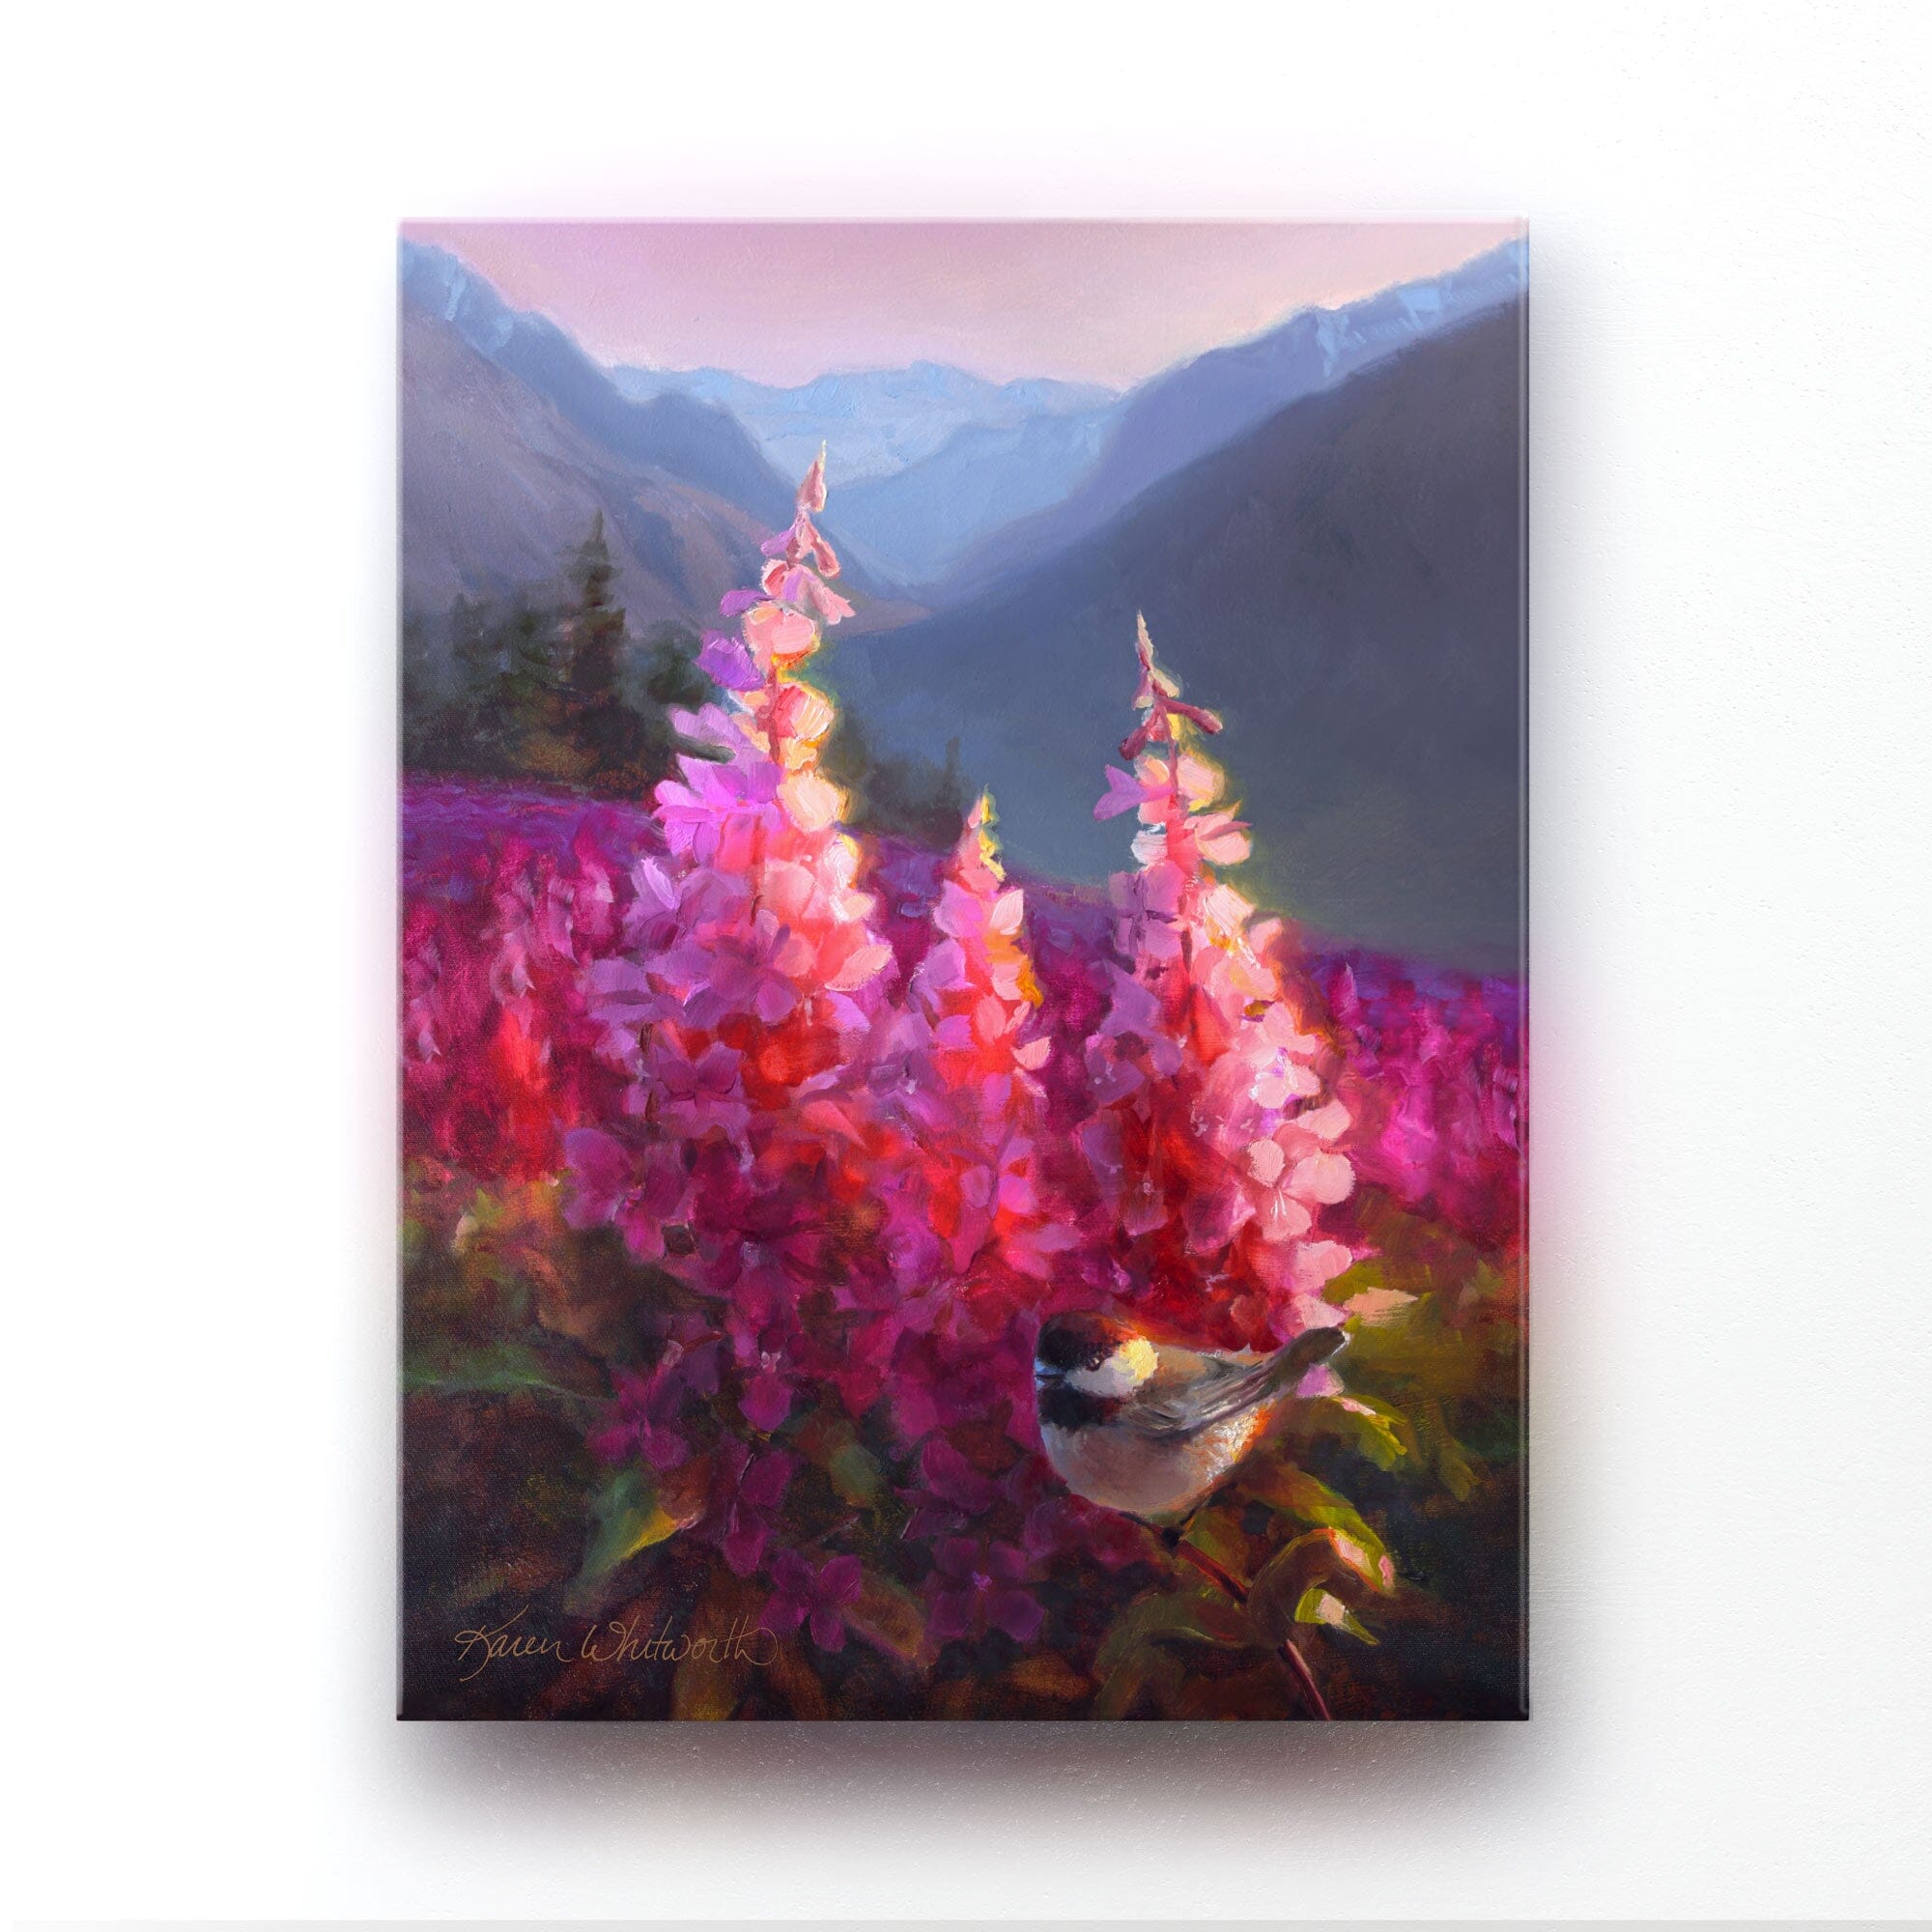 Canvas wall art of mountains, wildflowers, and chickadee in an Alaskan landscape painting by artist Karen Whitworth